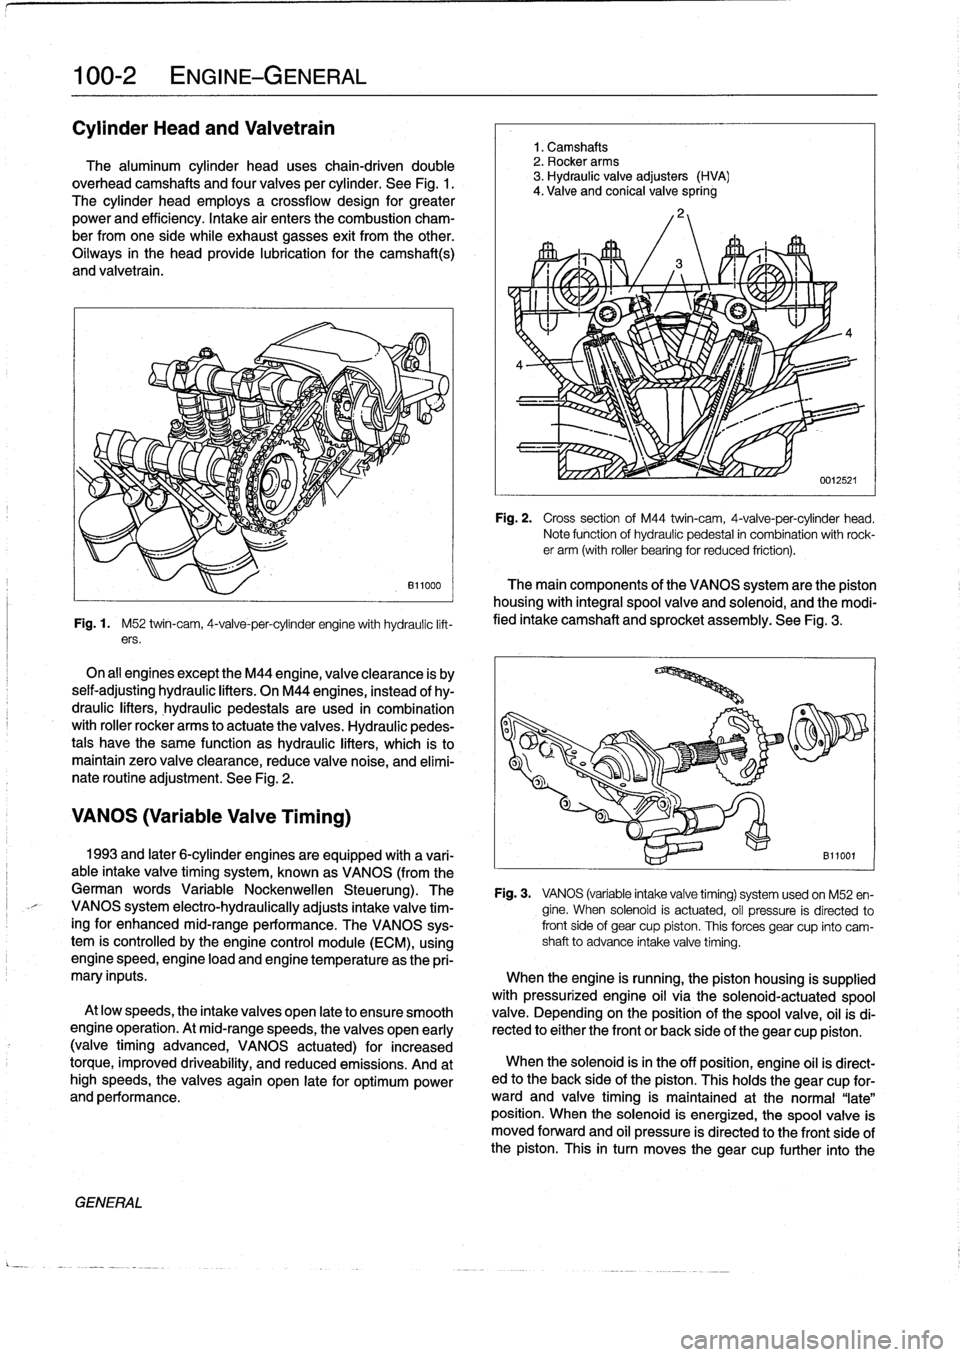 BMW 318i 1996 E36 Workshop Manual 
100-2
ENGINE-GENERAL

Cylinder
Head
and
Valvetrain

The
aluminum
cylinder
head
uses
chain-driven
double
overhead
camshafts
and
four
valves
per
cylinder
.
See
Fig
.
1
.

The
cylinder
head
employs
a
cr